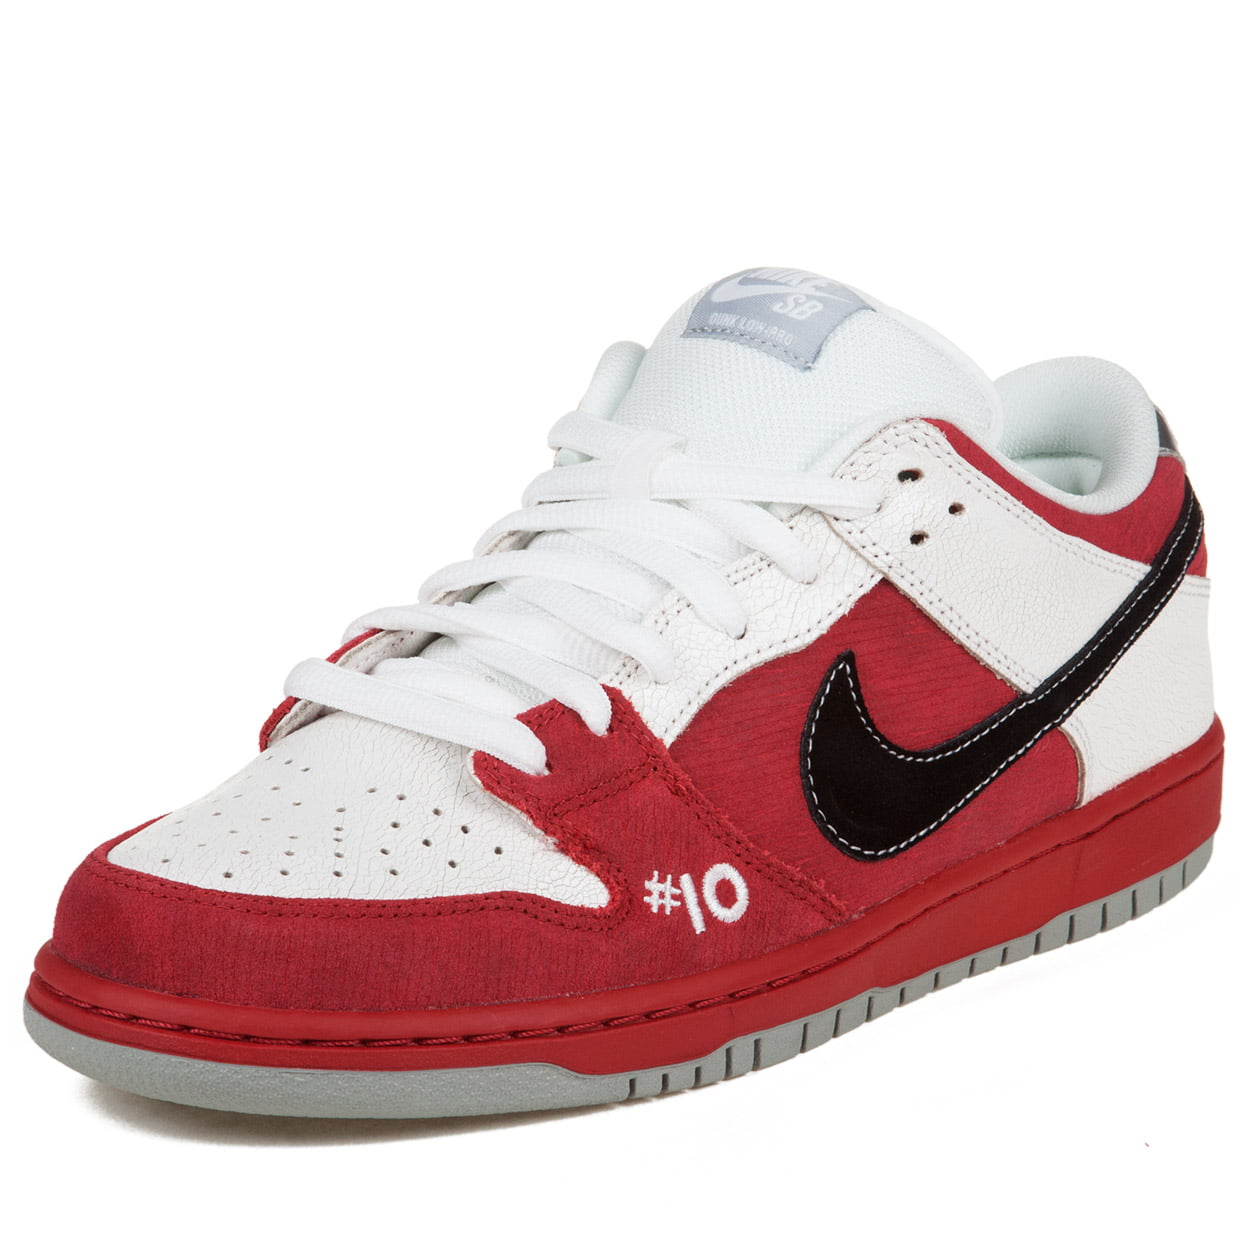 Sintético 94+ Foto Dunk Low Black And Chile Red Cena Hermosa